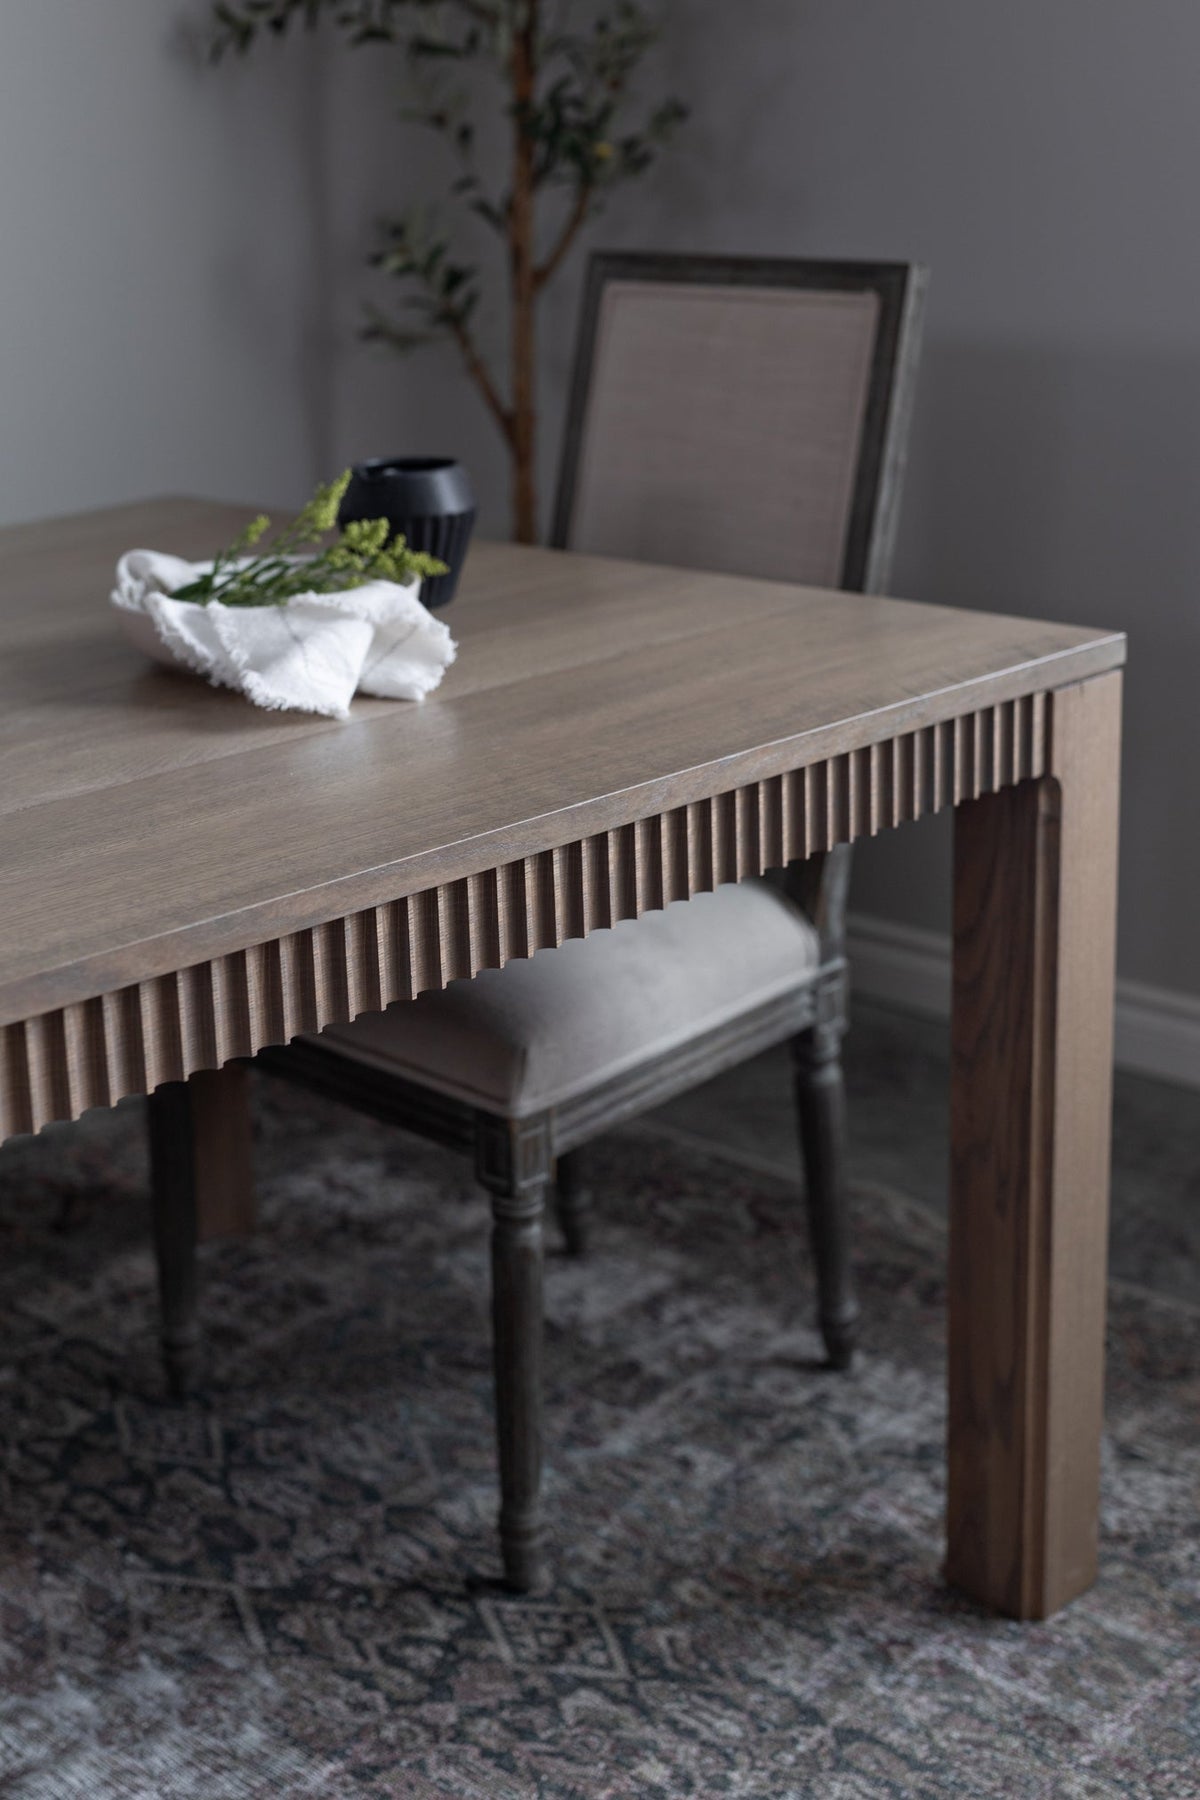 Remington Dining Table - in stock